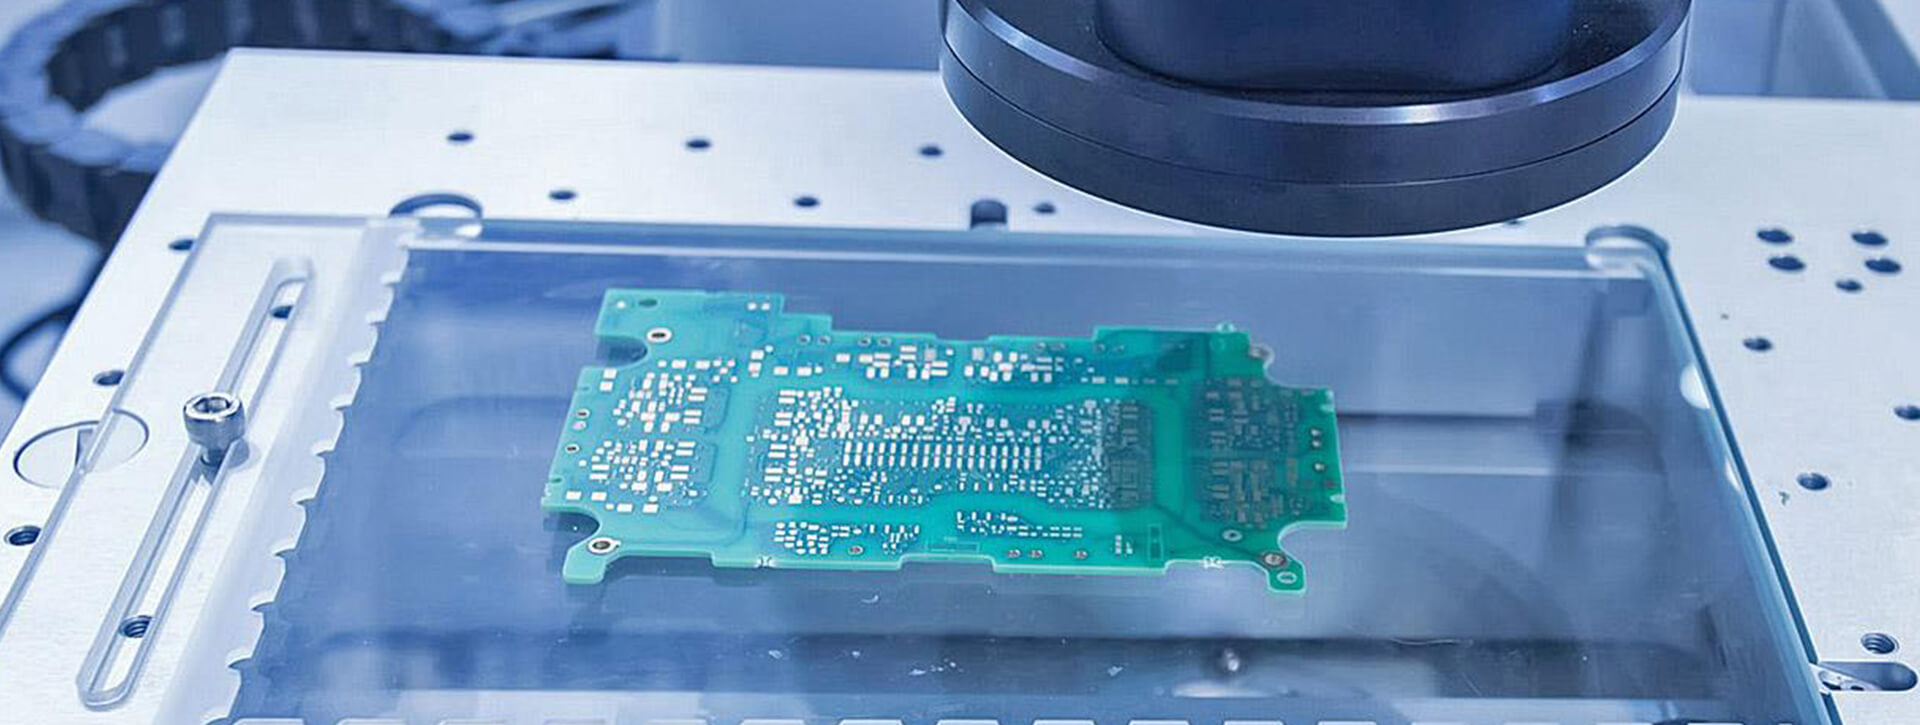 PCB Optical Inspection